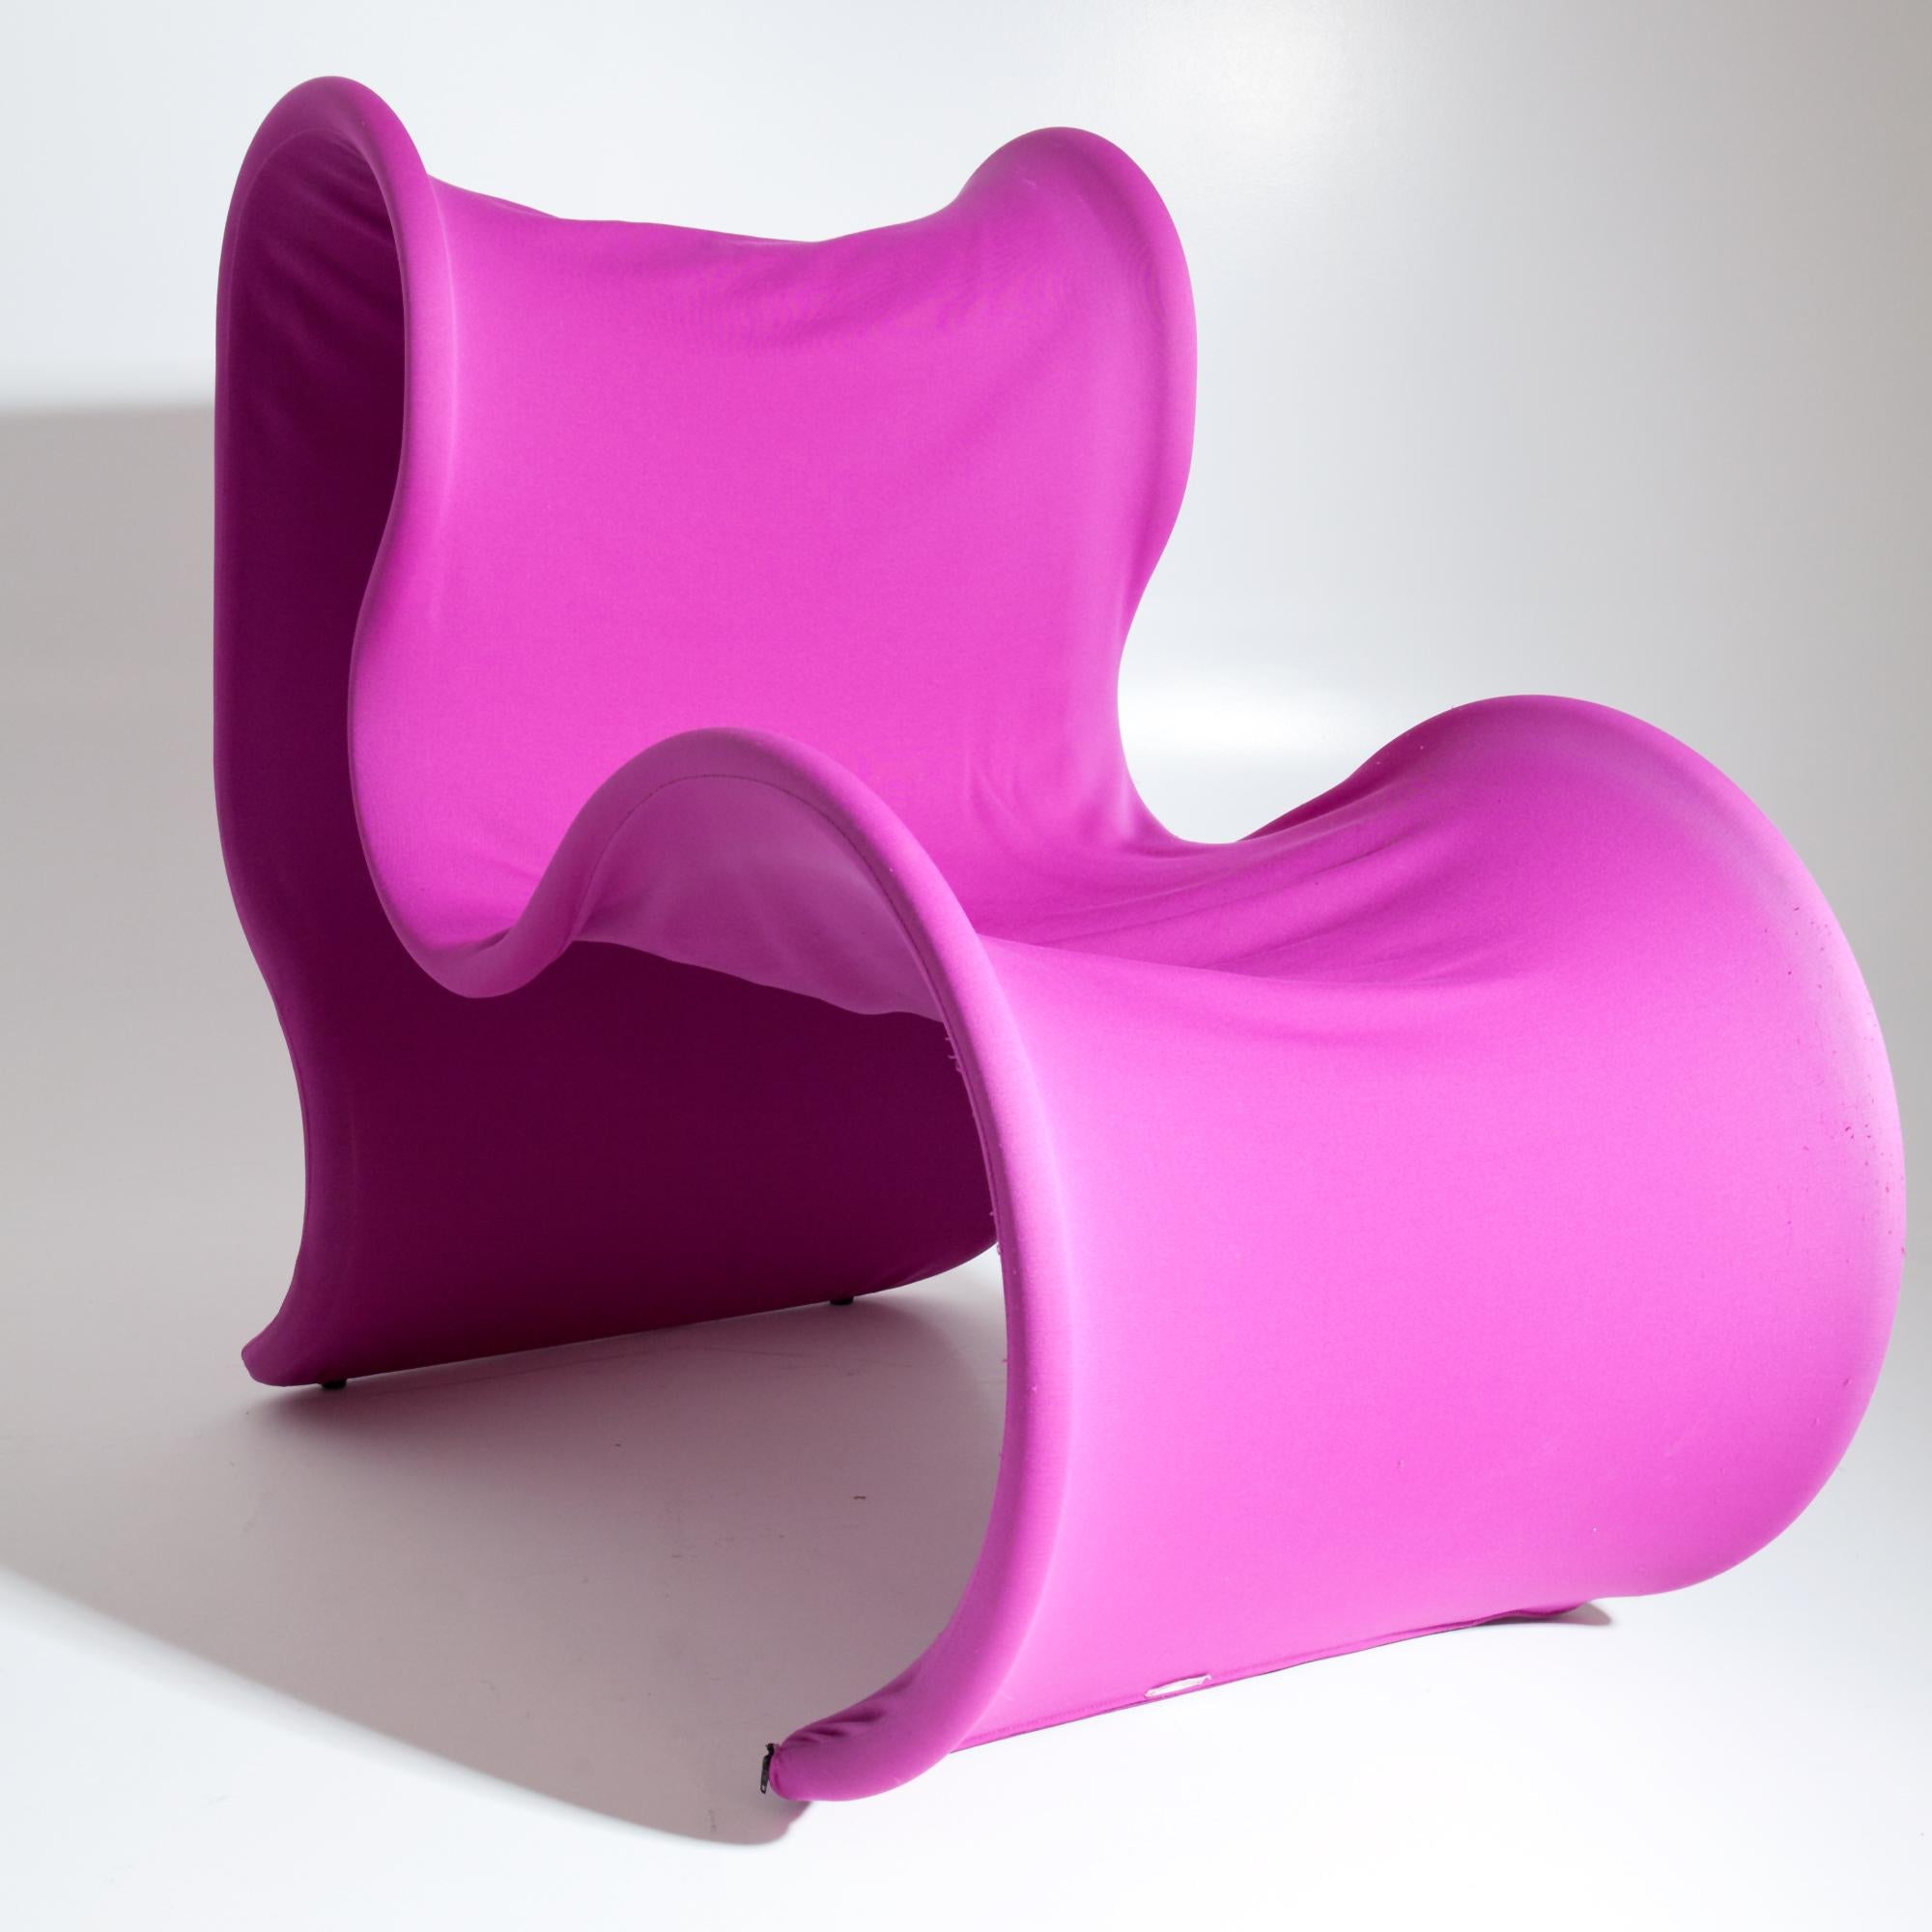 Curved armchair with pink fabric cover placed over steel tube stretched. Small plaque 